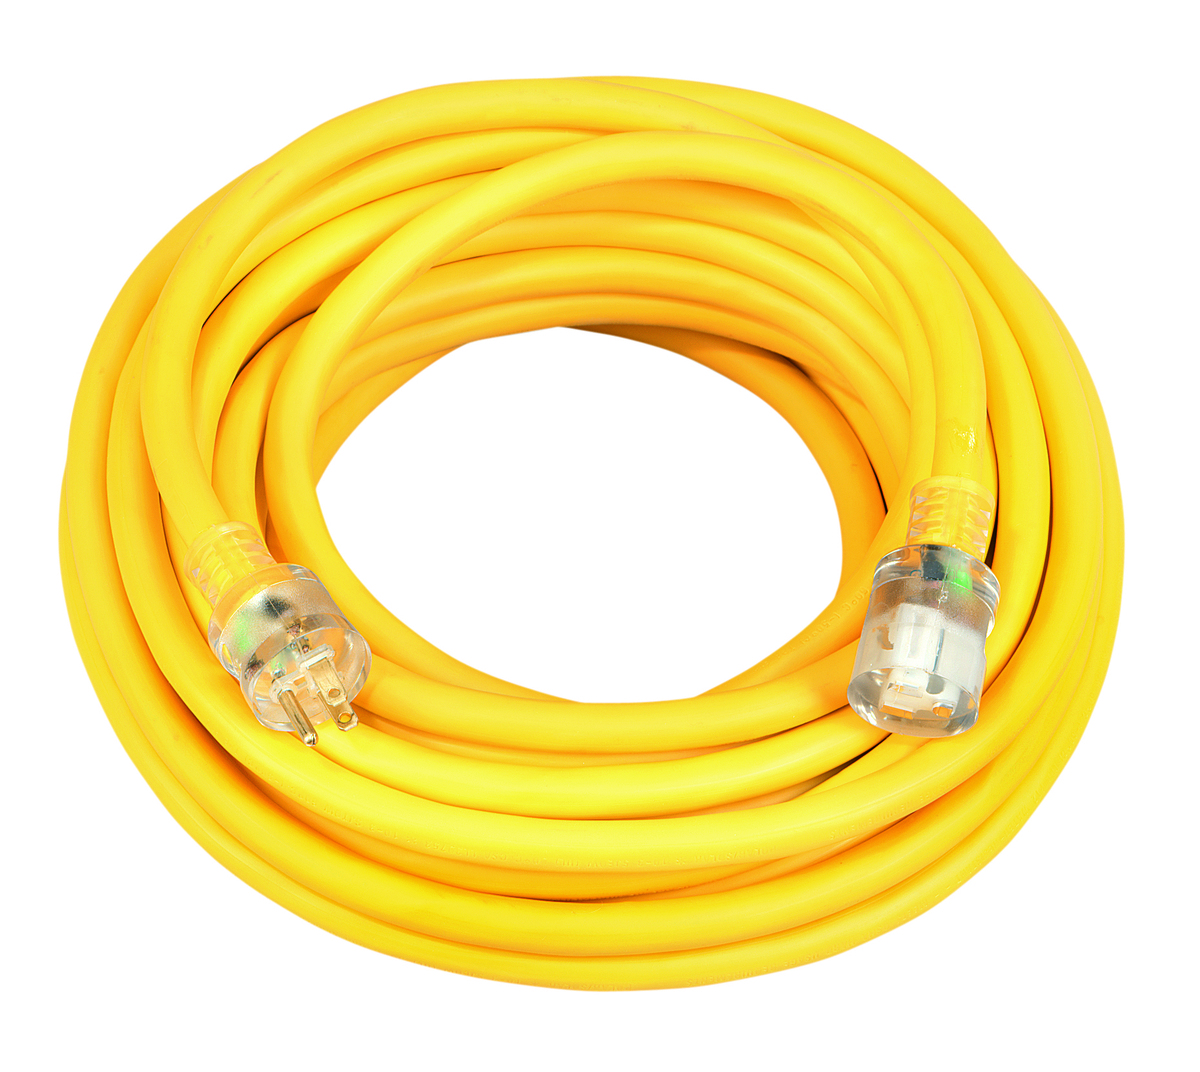 Southwire 2689SW0002 10/3 Extra Heavy-Duty 15-Amp SJTW High Visibility General Purpose Extension Cord with Lighted End, 100